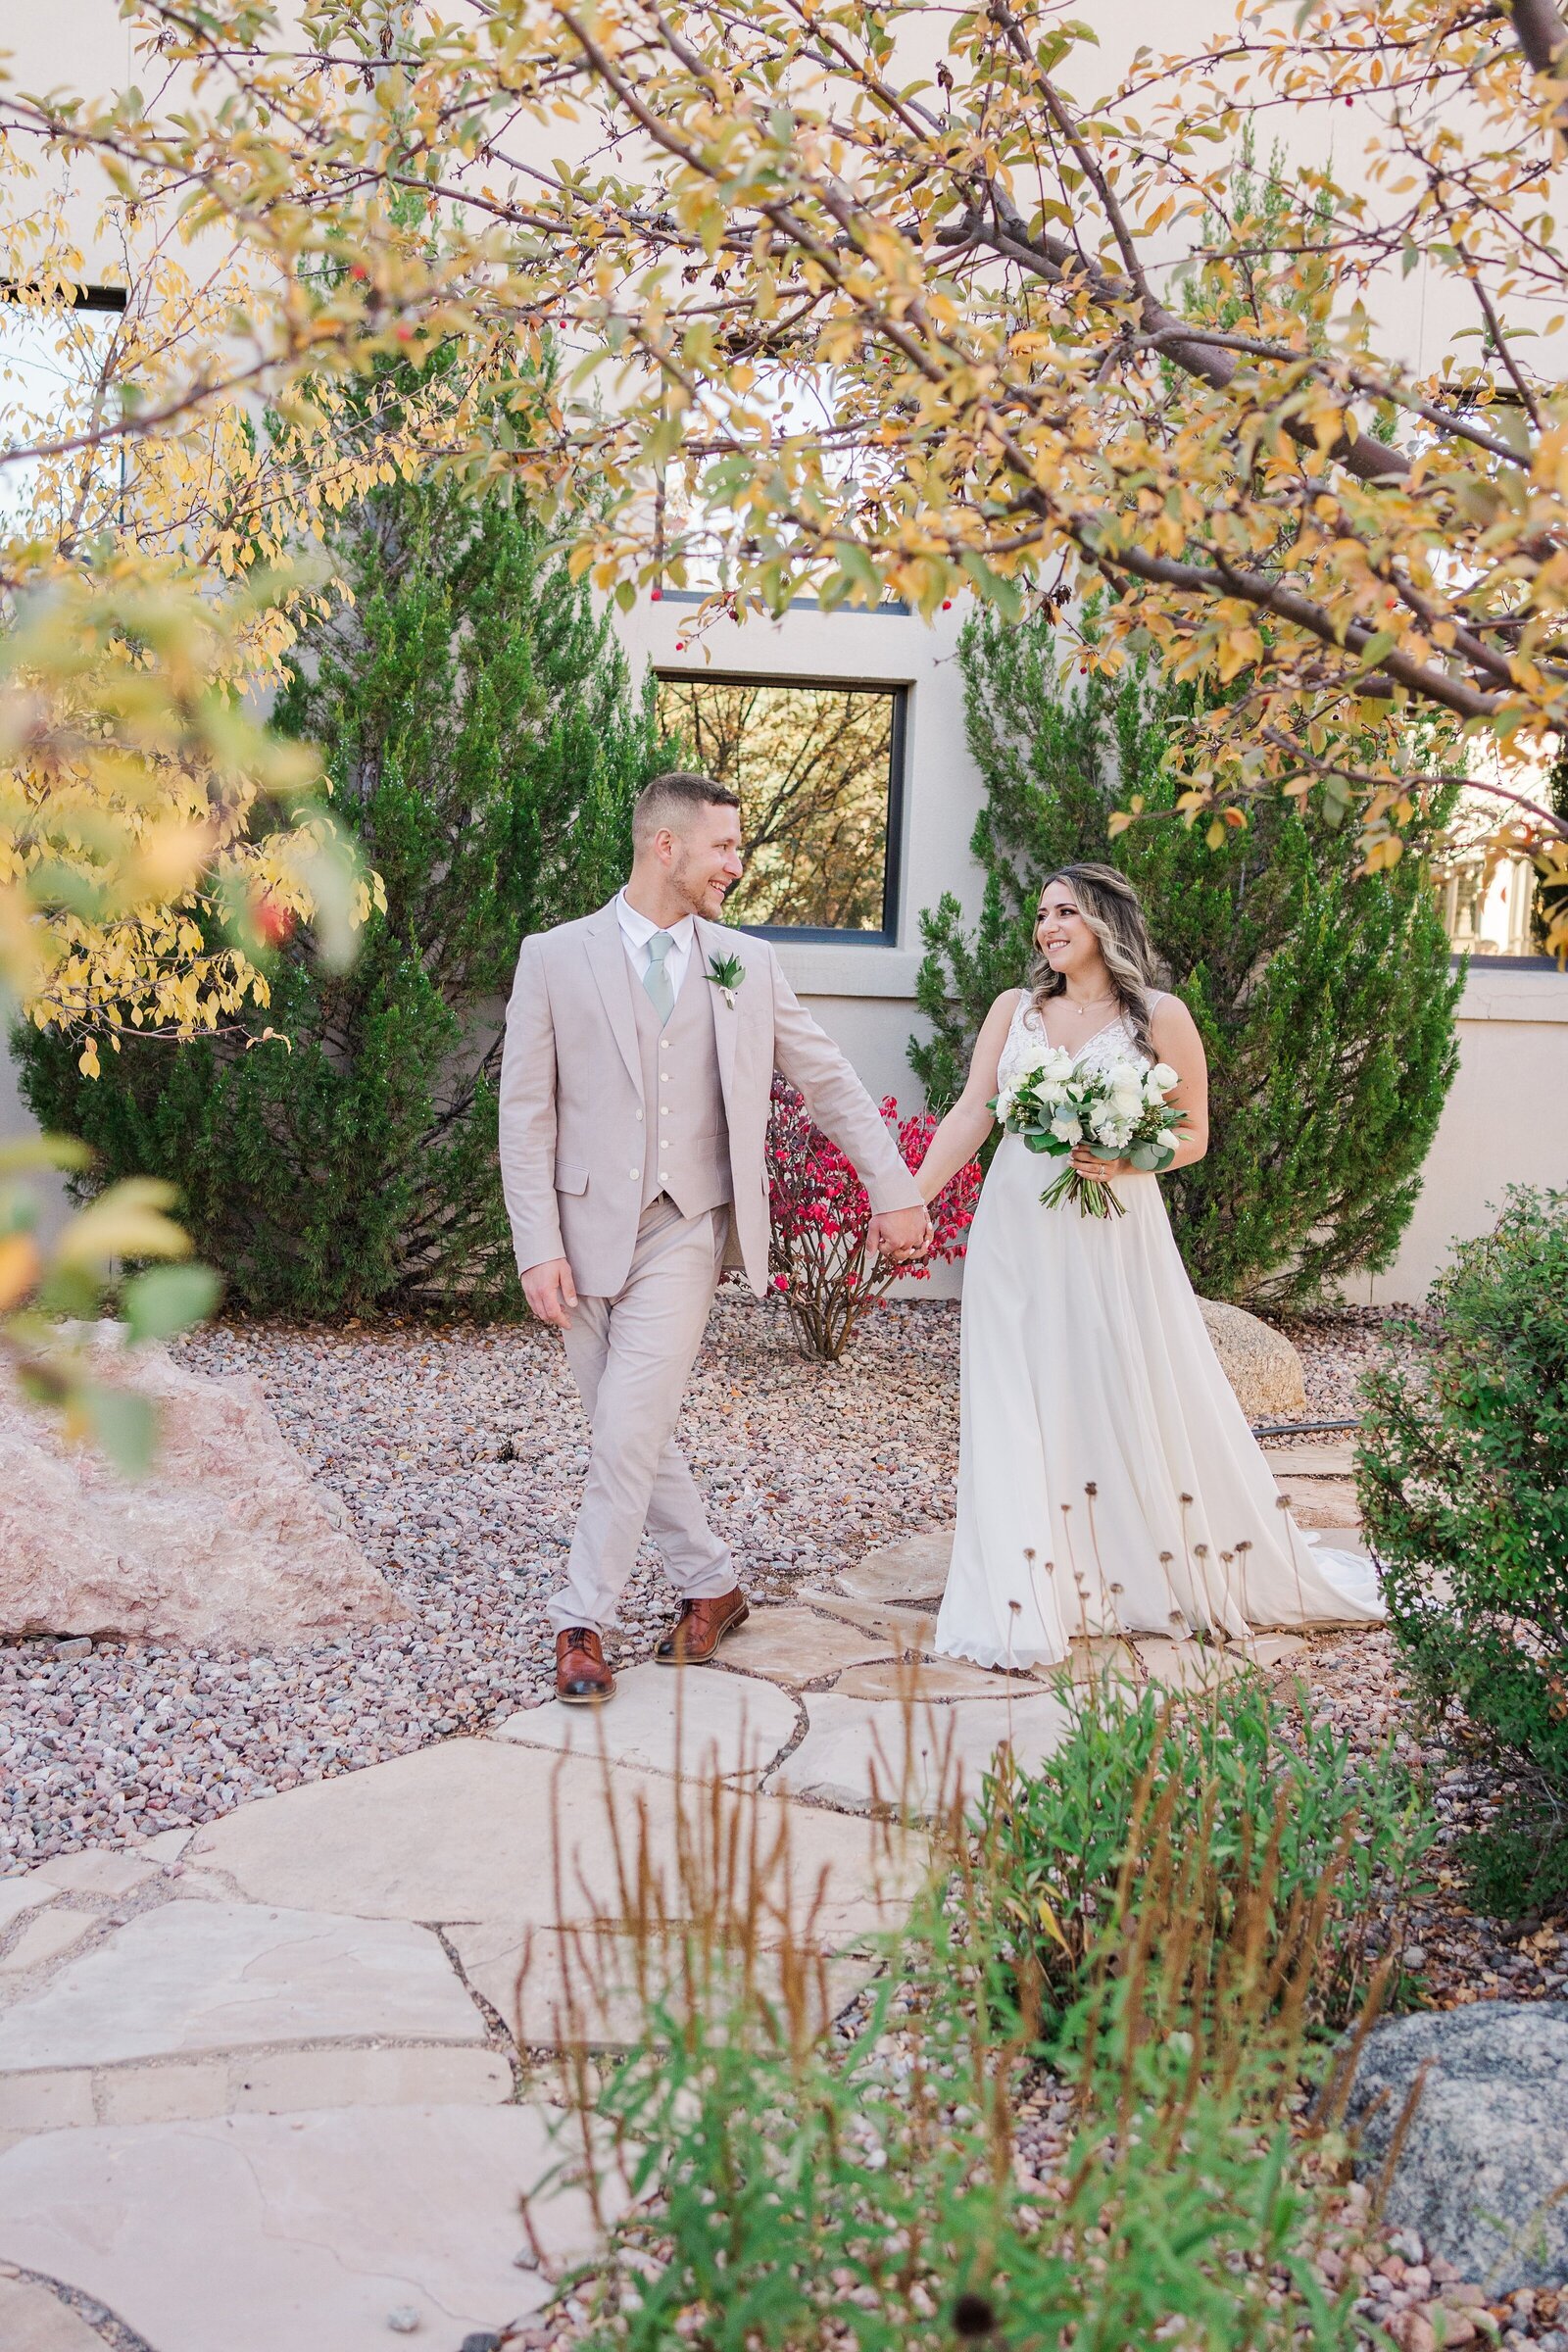 Capture the essence of your love story with Samantha Immer Photography, your trusted Colorado wedding photographer. Let's craft an intimate wedding experience that is uniquely you, with stunning mountain vistas as your backdrop.